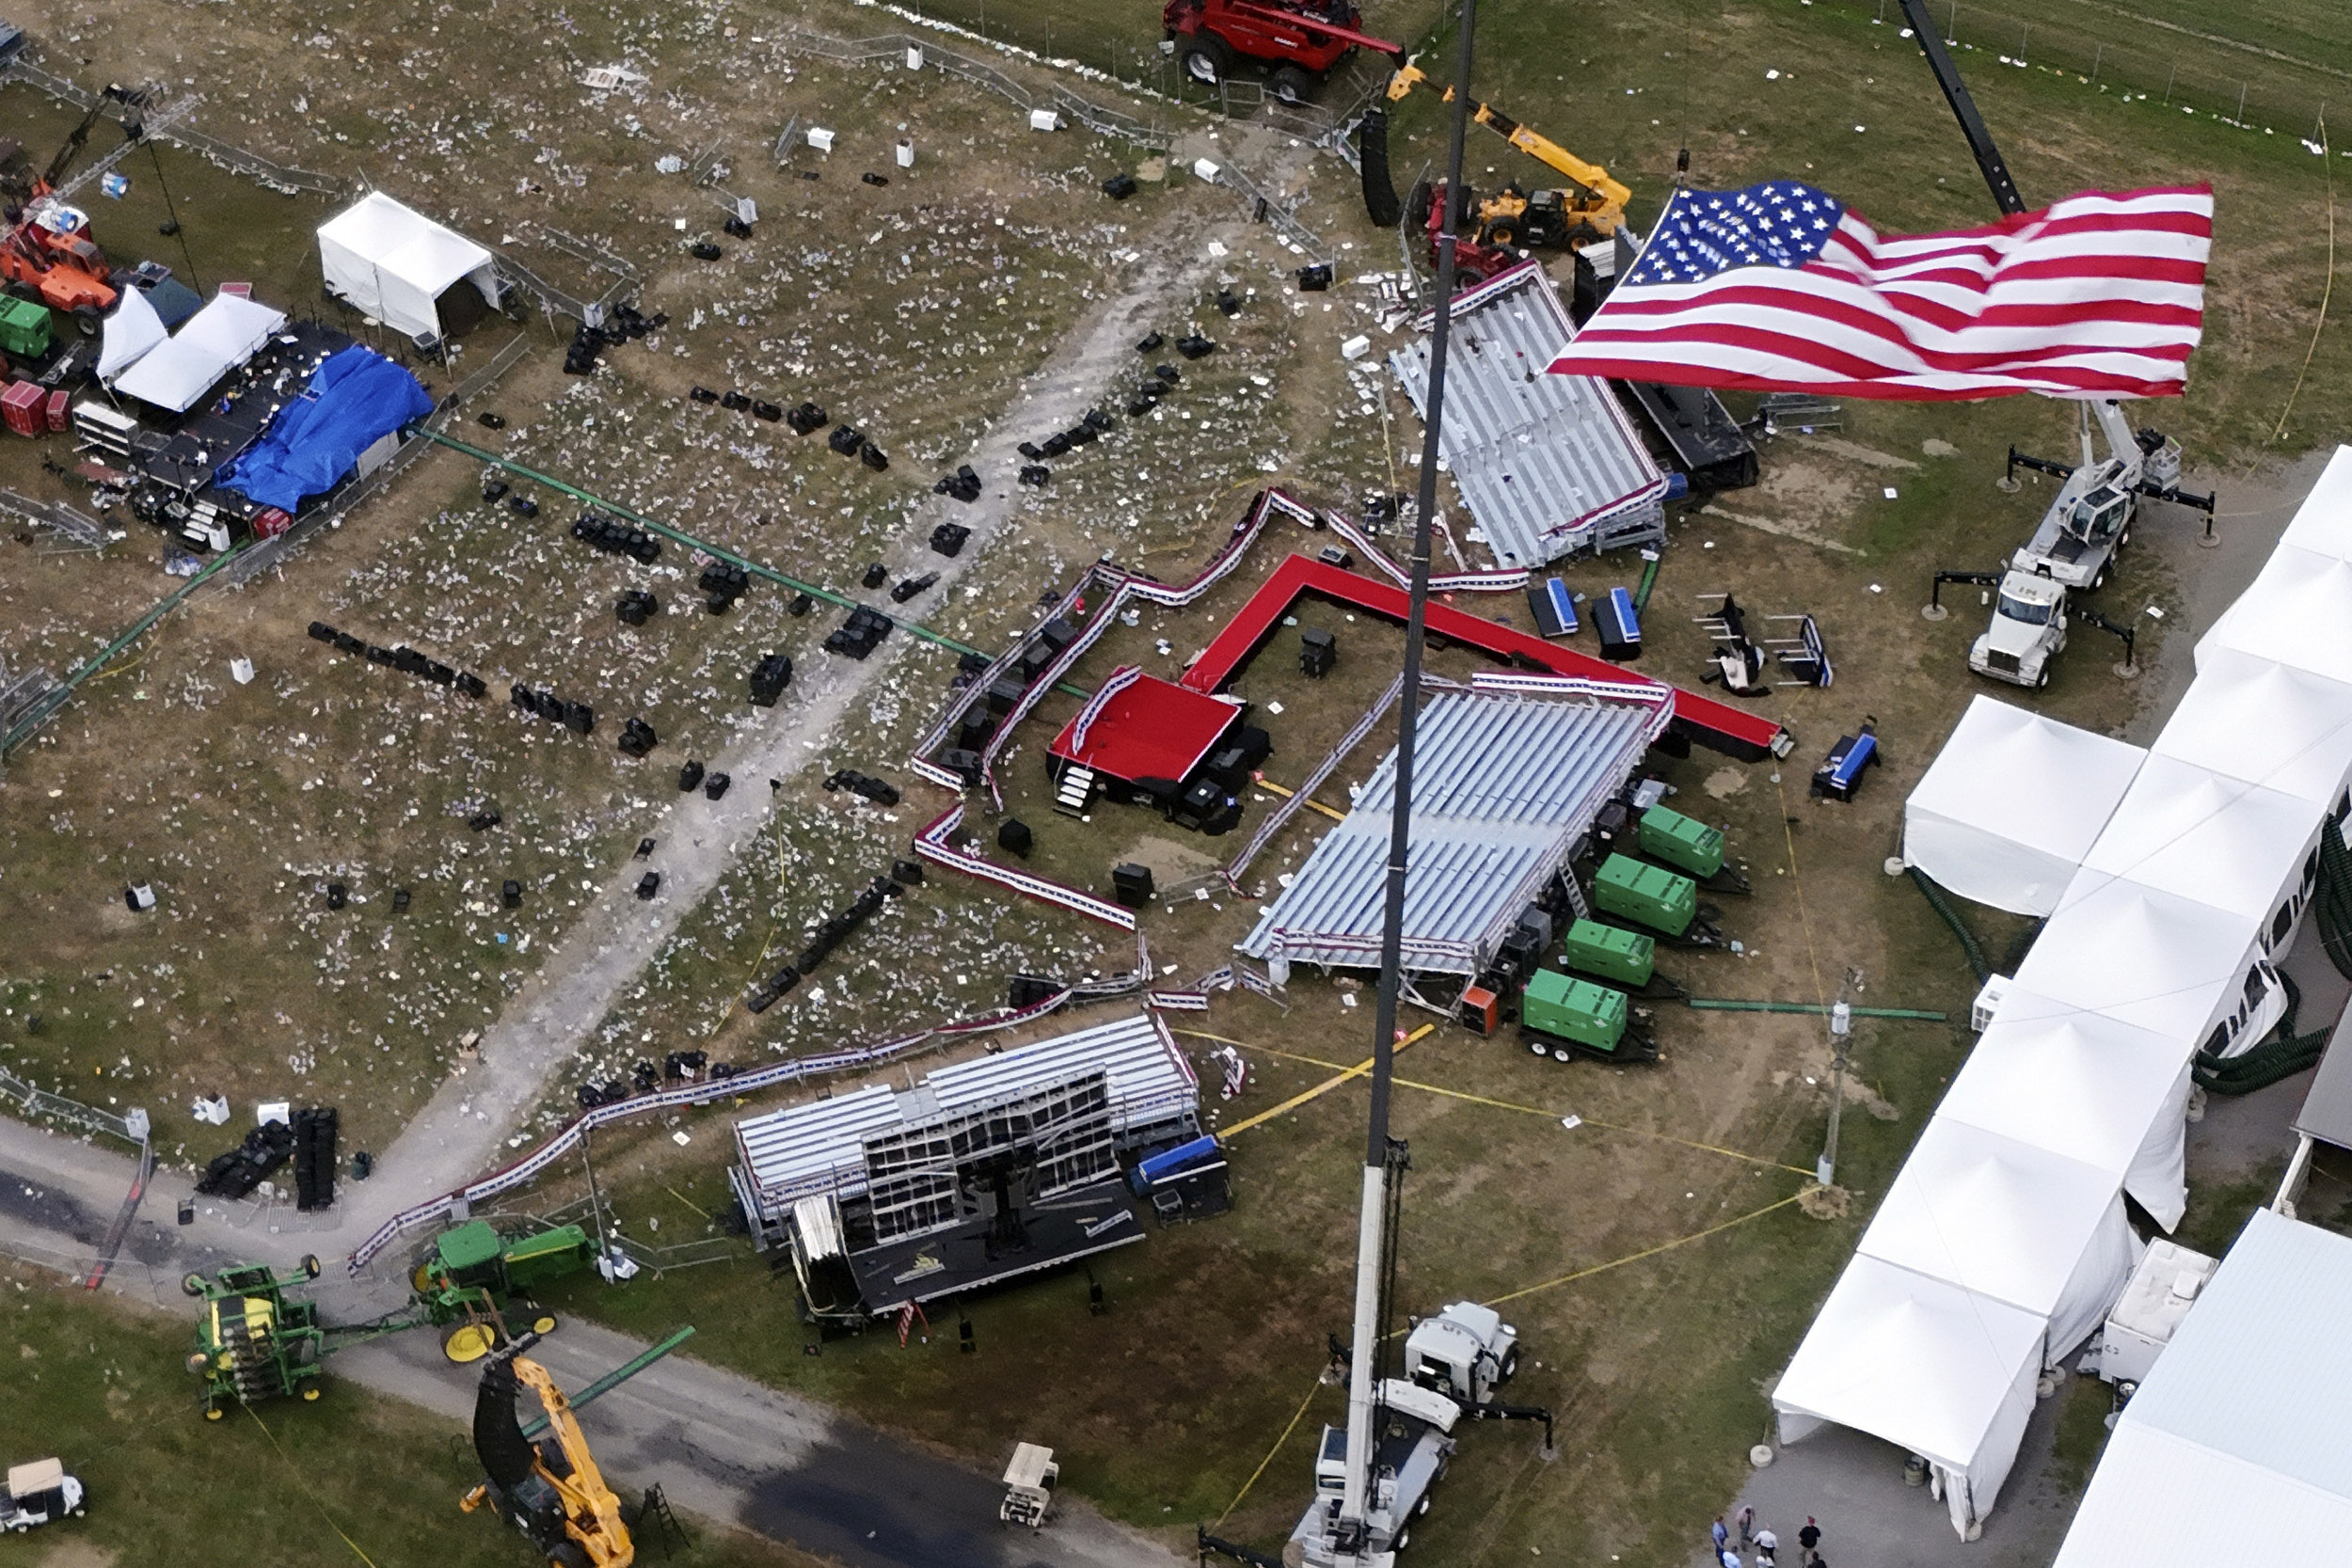 American flag flies in foreground of aerial view of Trump rally site days after attempted assassination.